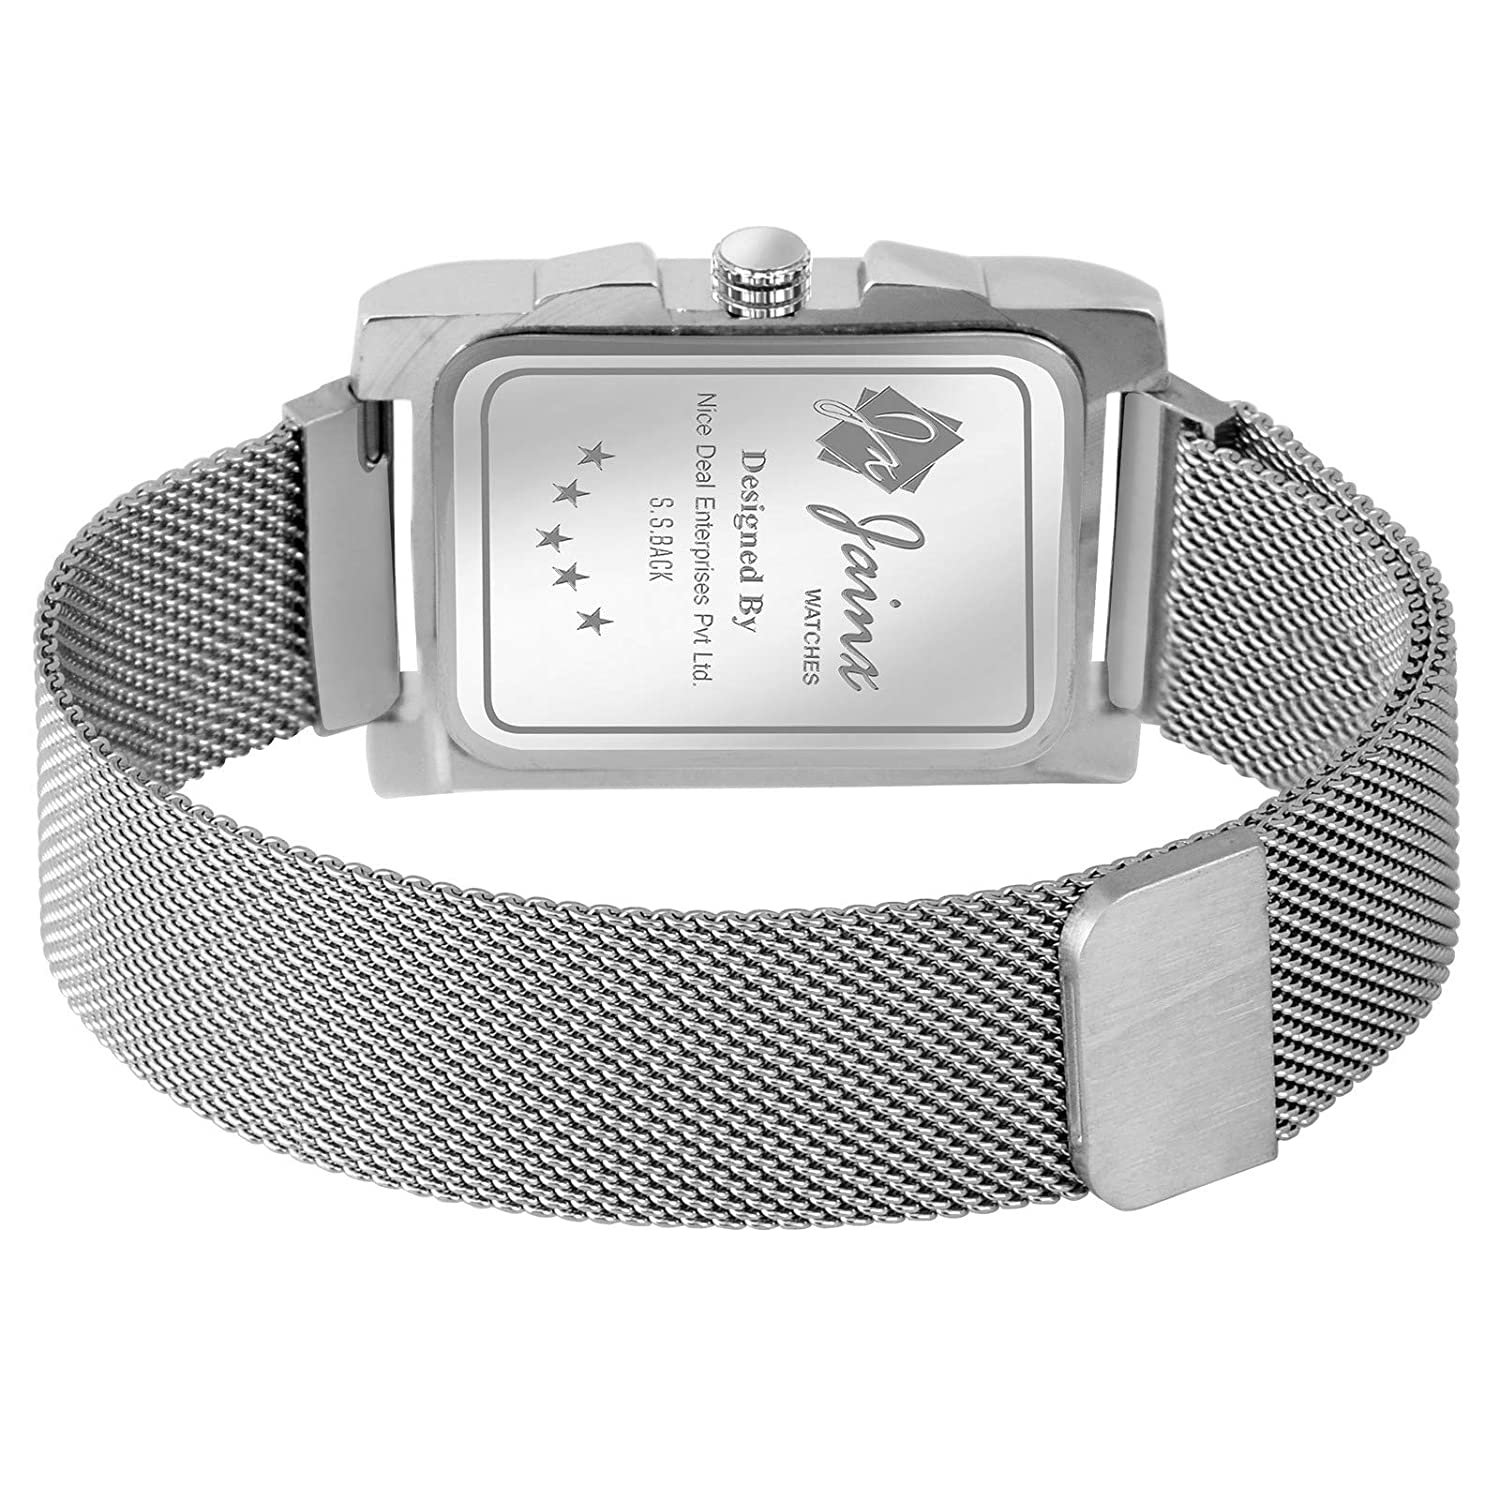 Square Silver Magnet Mesh Chain Day and Date Functioning Analog Watch - For Men JM360 - Jainx Store